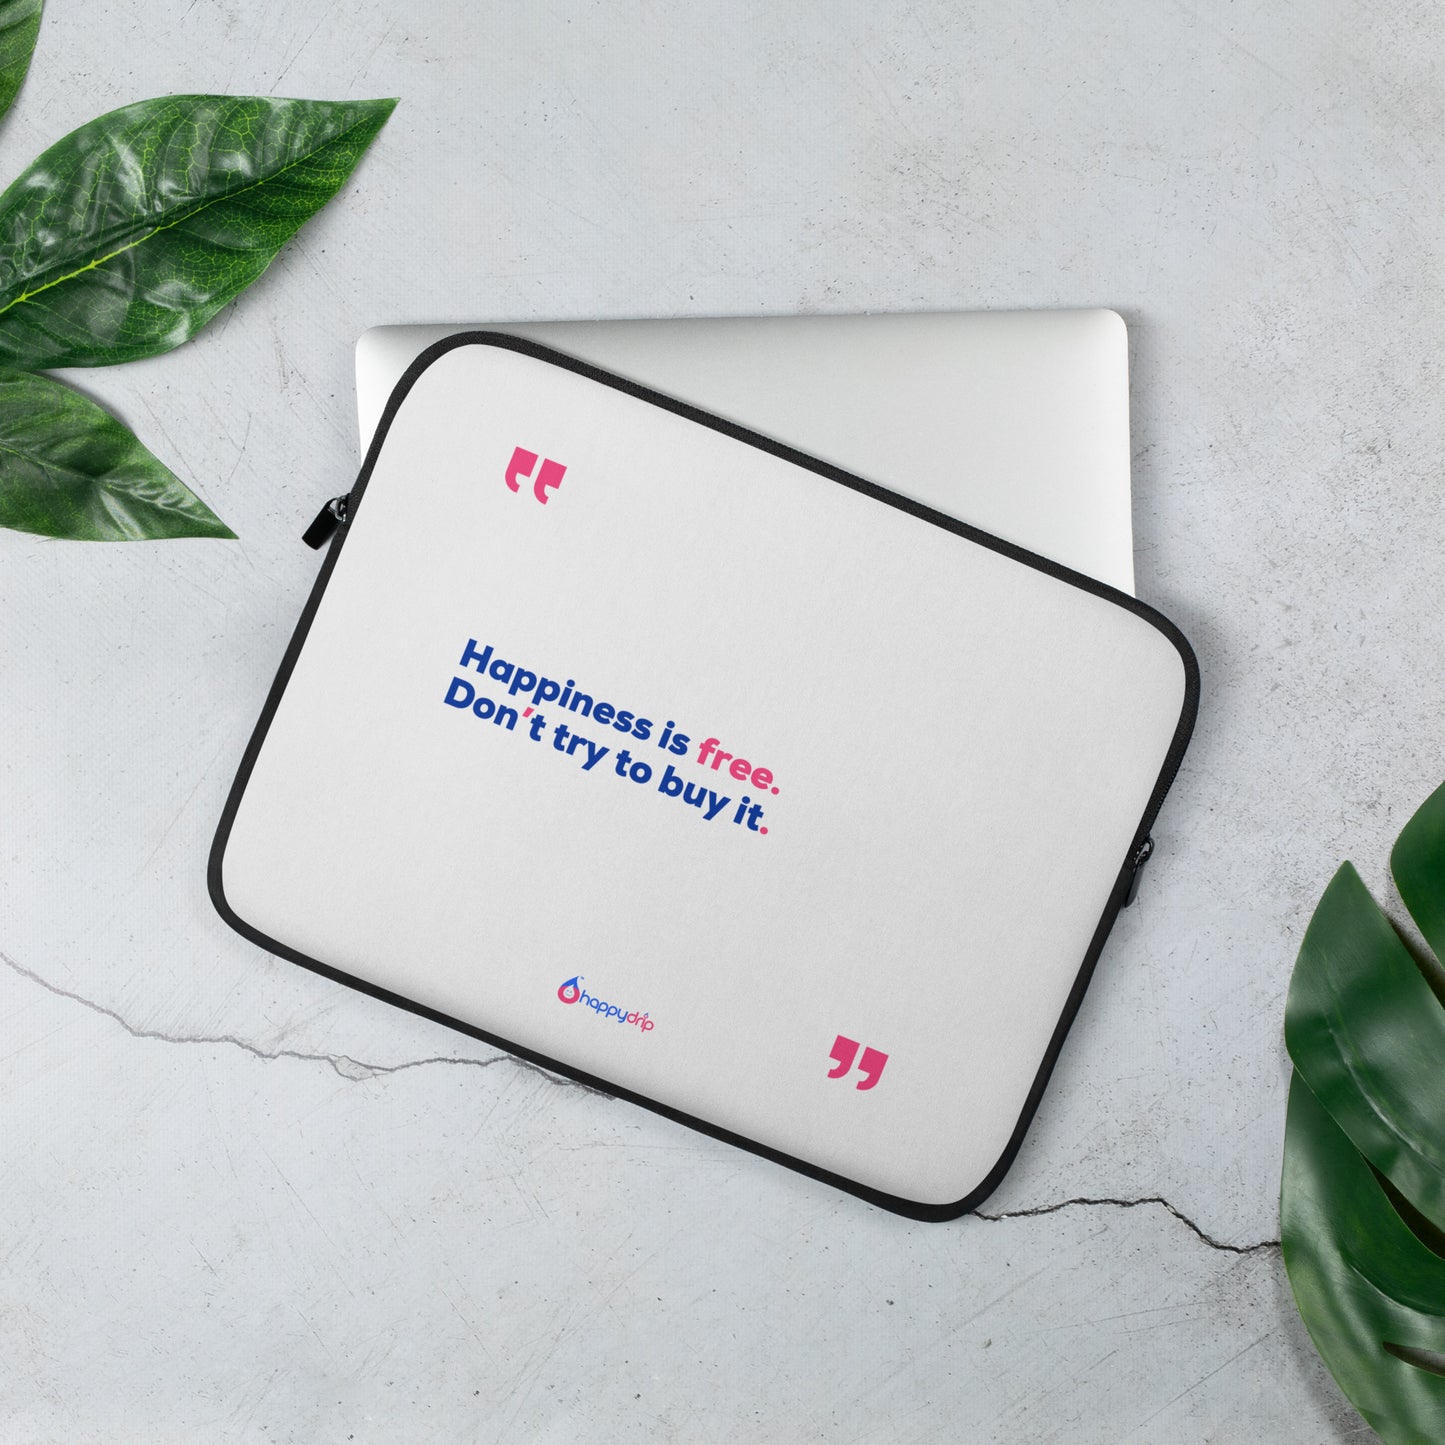 Happiness is Free. Don't try to buy it - White Laptop Sleeve